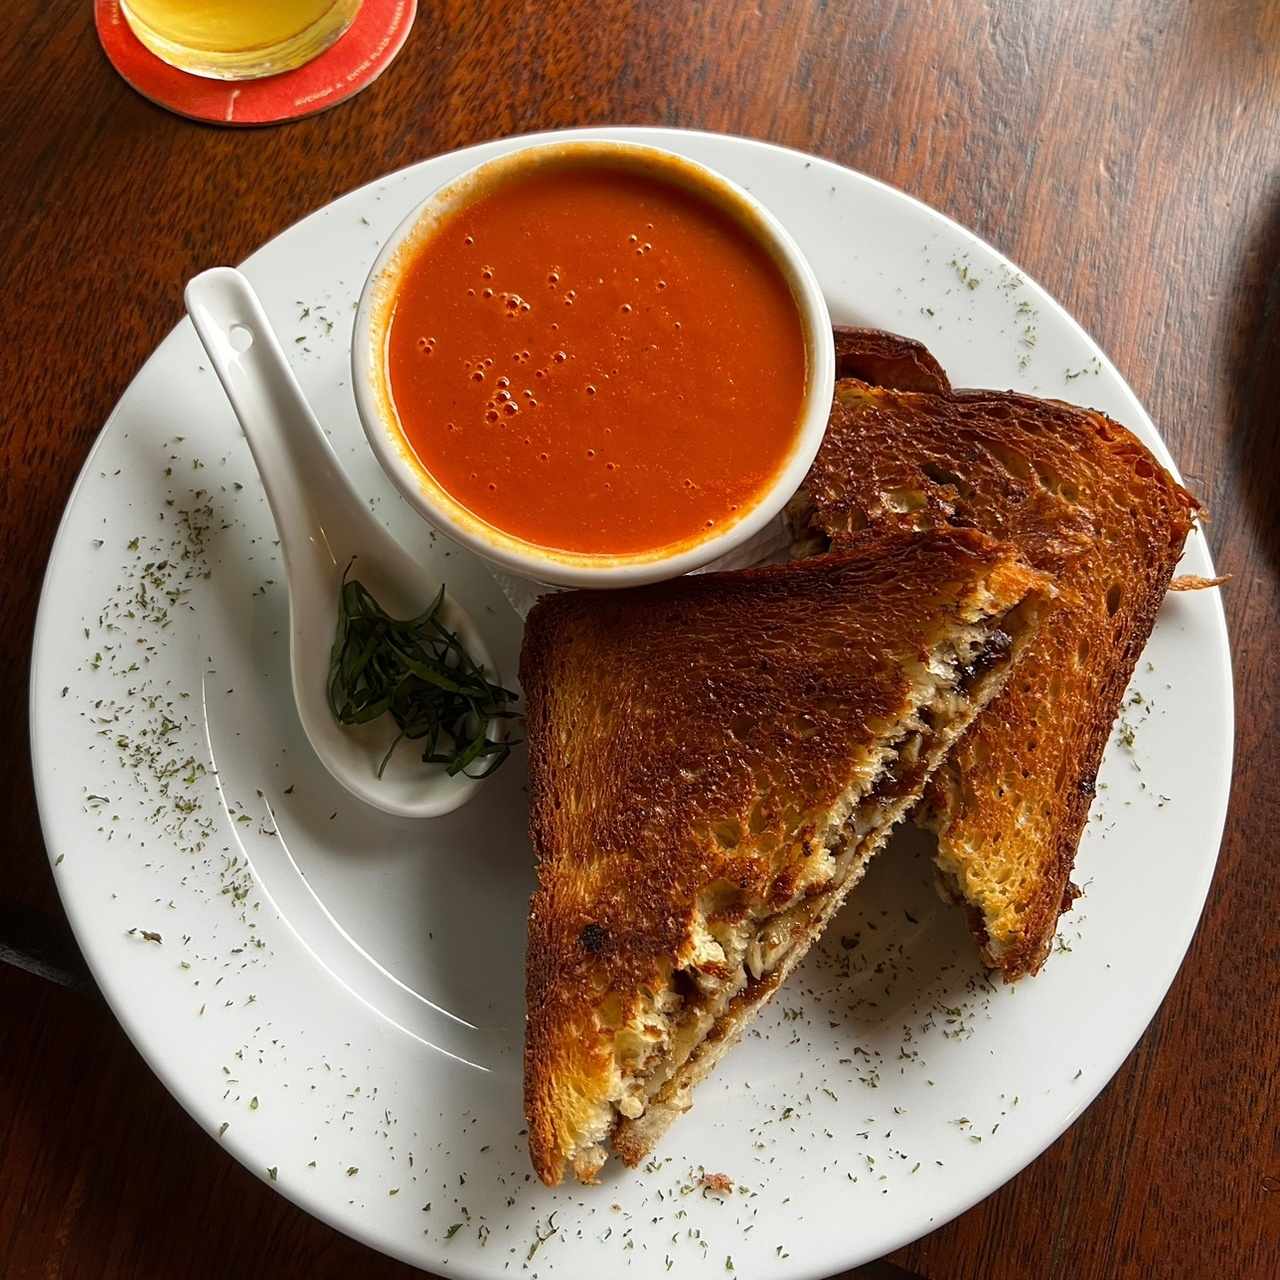 Grilled Cheese with Tomato soup